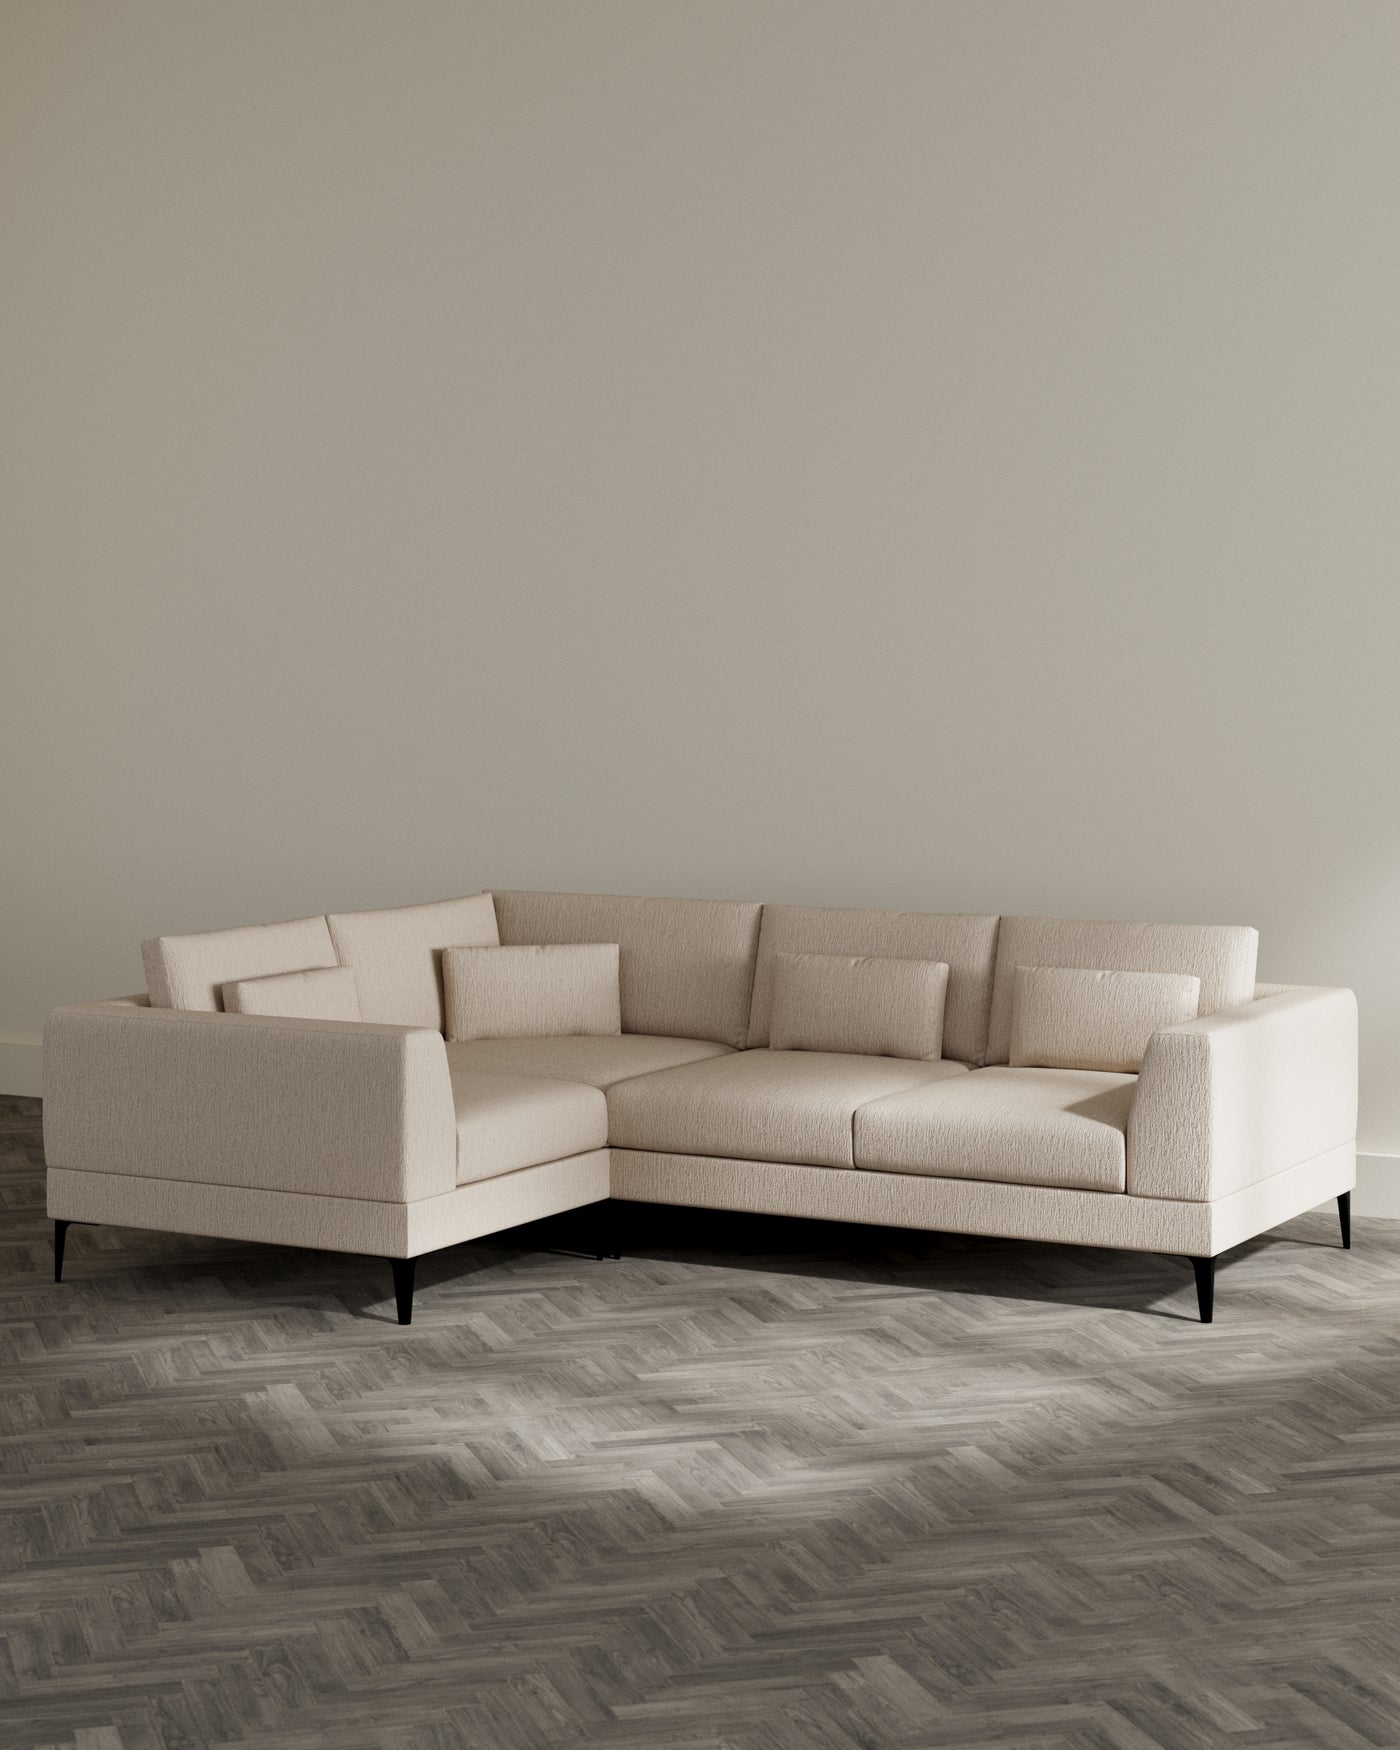 Contemporary L-shaped sectional sofa in a light beige fabric with a simple, elegant design. The sofa features clean lines, plush cushions, and low-profile black legs, creating a modern aesthetic suitable for a variety of living spaces.